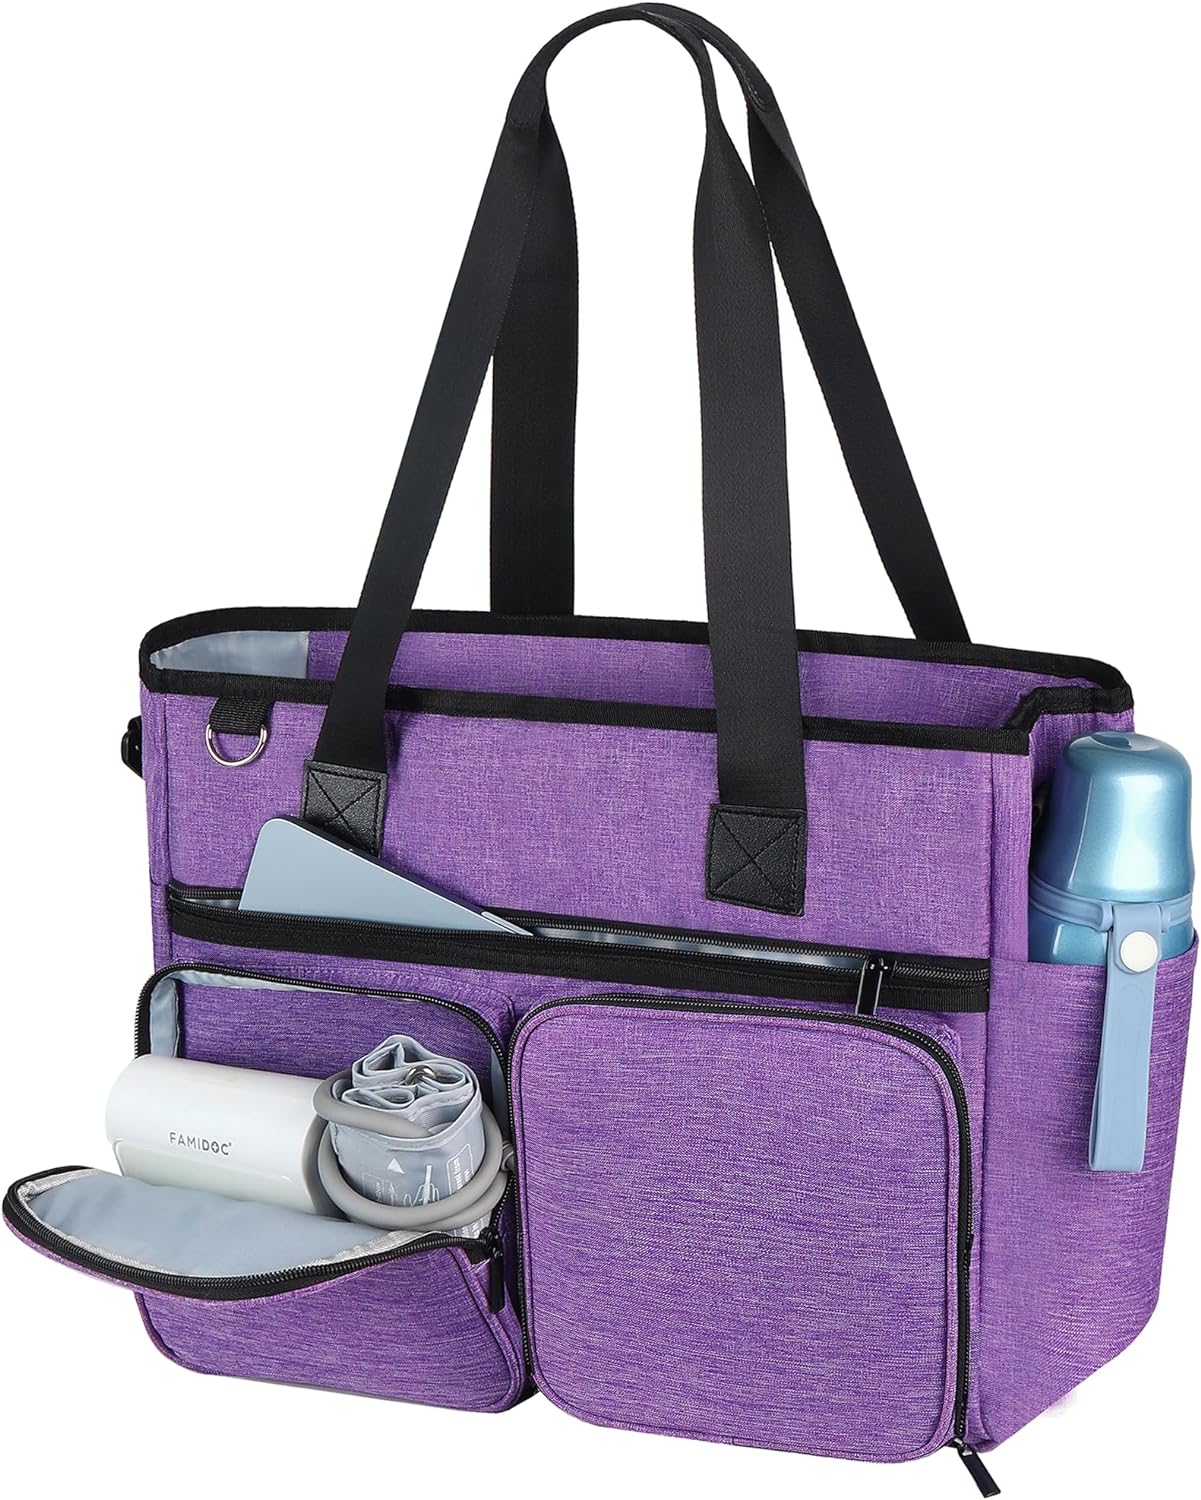 Amazon.com: Fasrom Nurse Tote Bag for Work Nurses with Laptop Sleeve, Home  Health Clinical Bag for Nursing Students and Medical Assistant, Pink  (Patent Pending) : Tools & Home Improvement